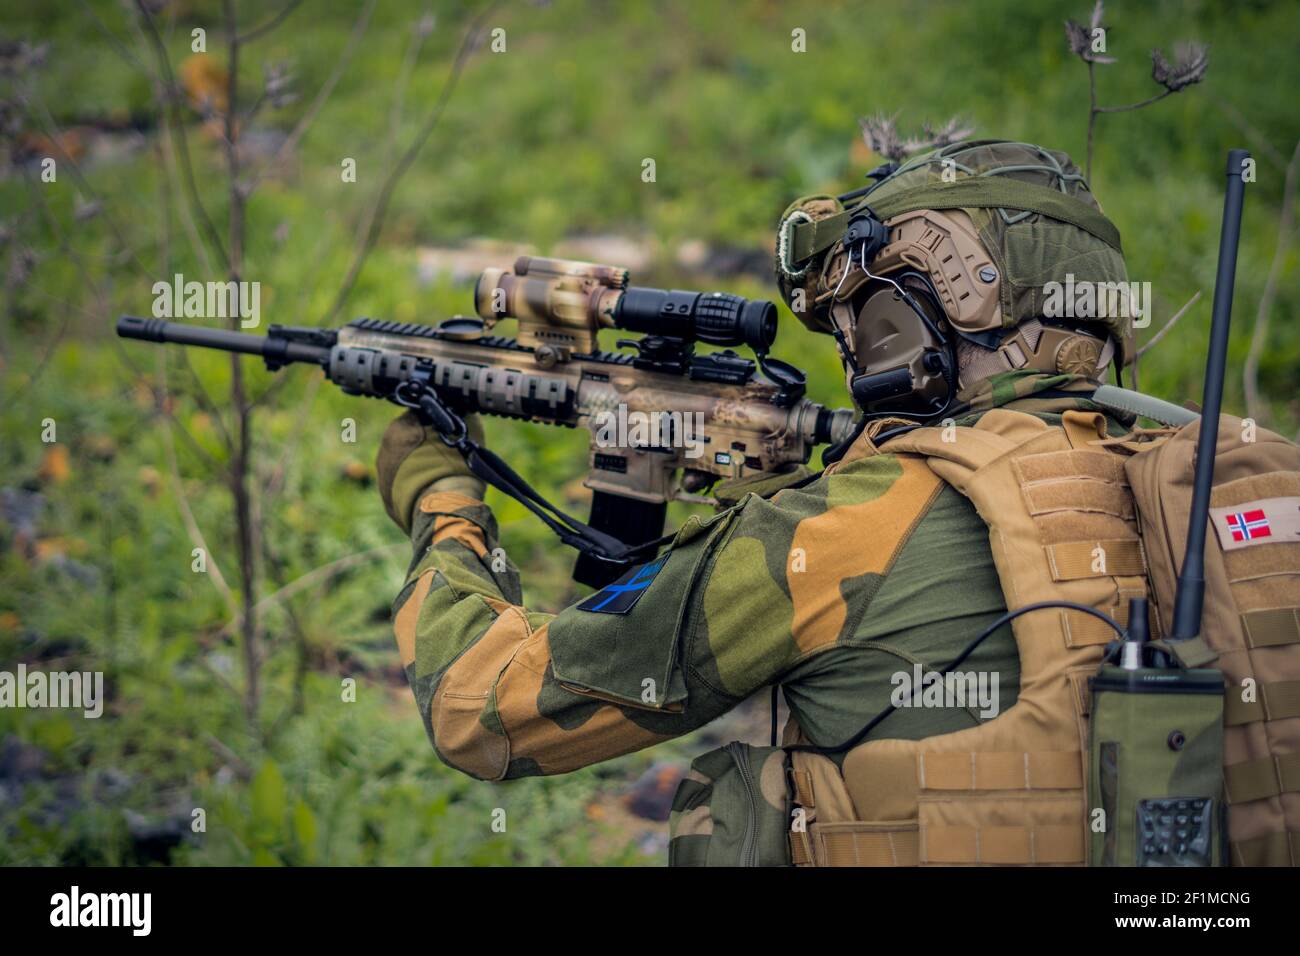 A side view of a special forces soldier aiming with an assault rifle Stock Photo